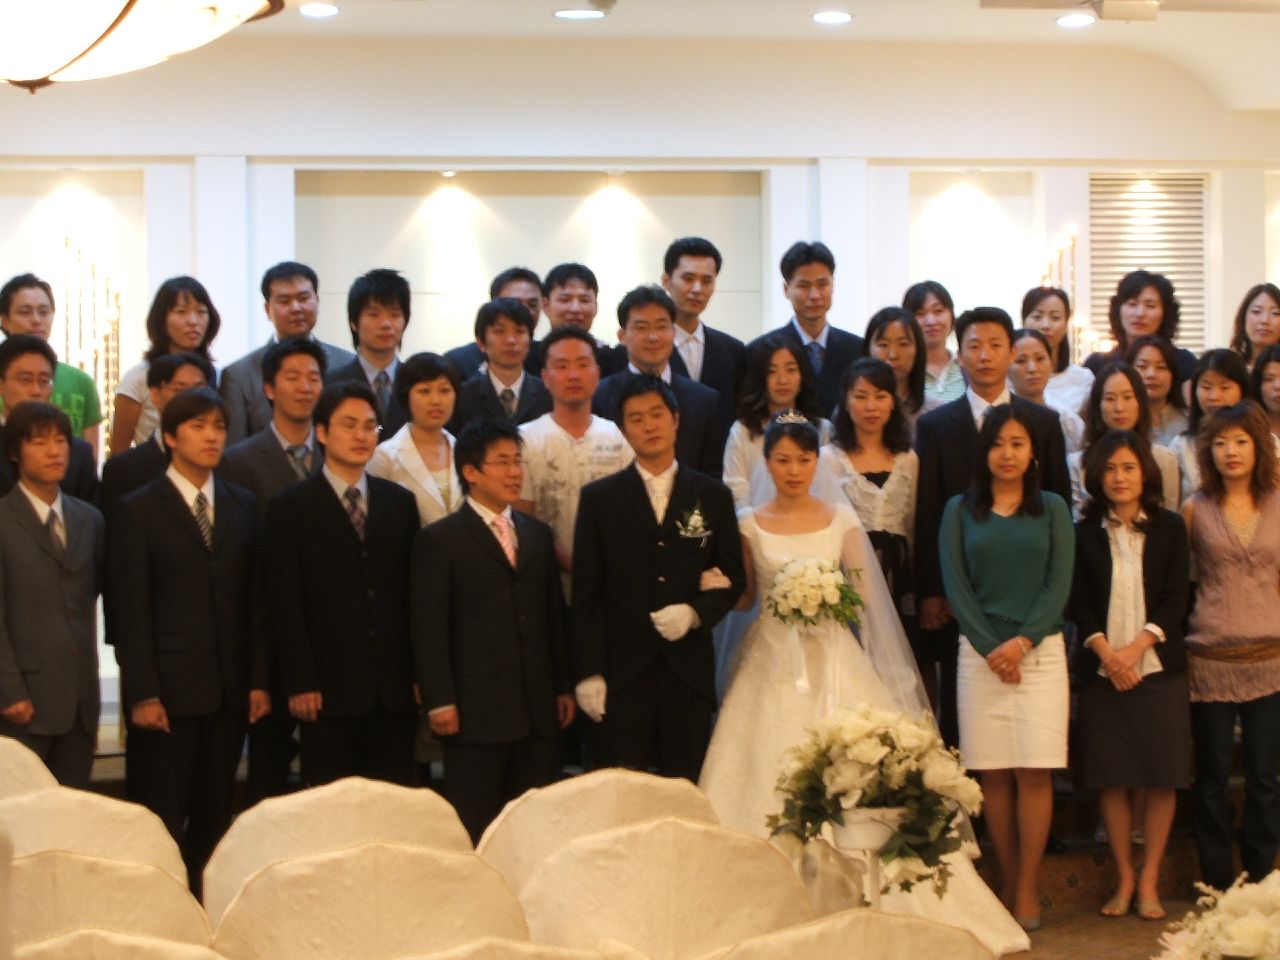 wedding group posing for a picture in a banquet hall